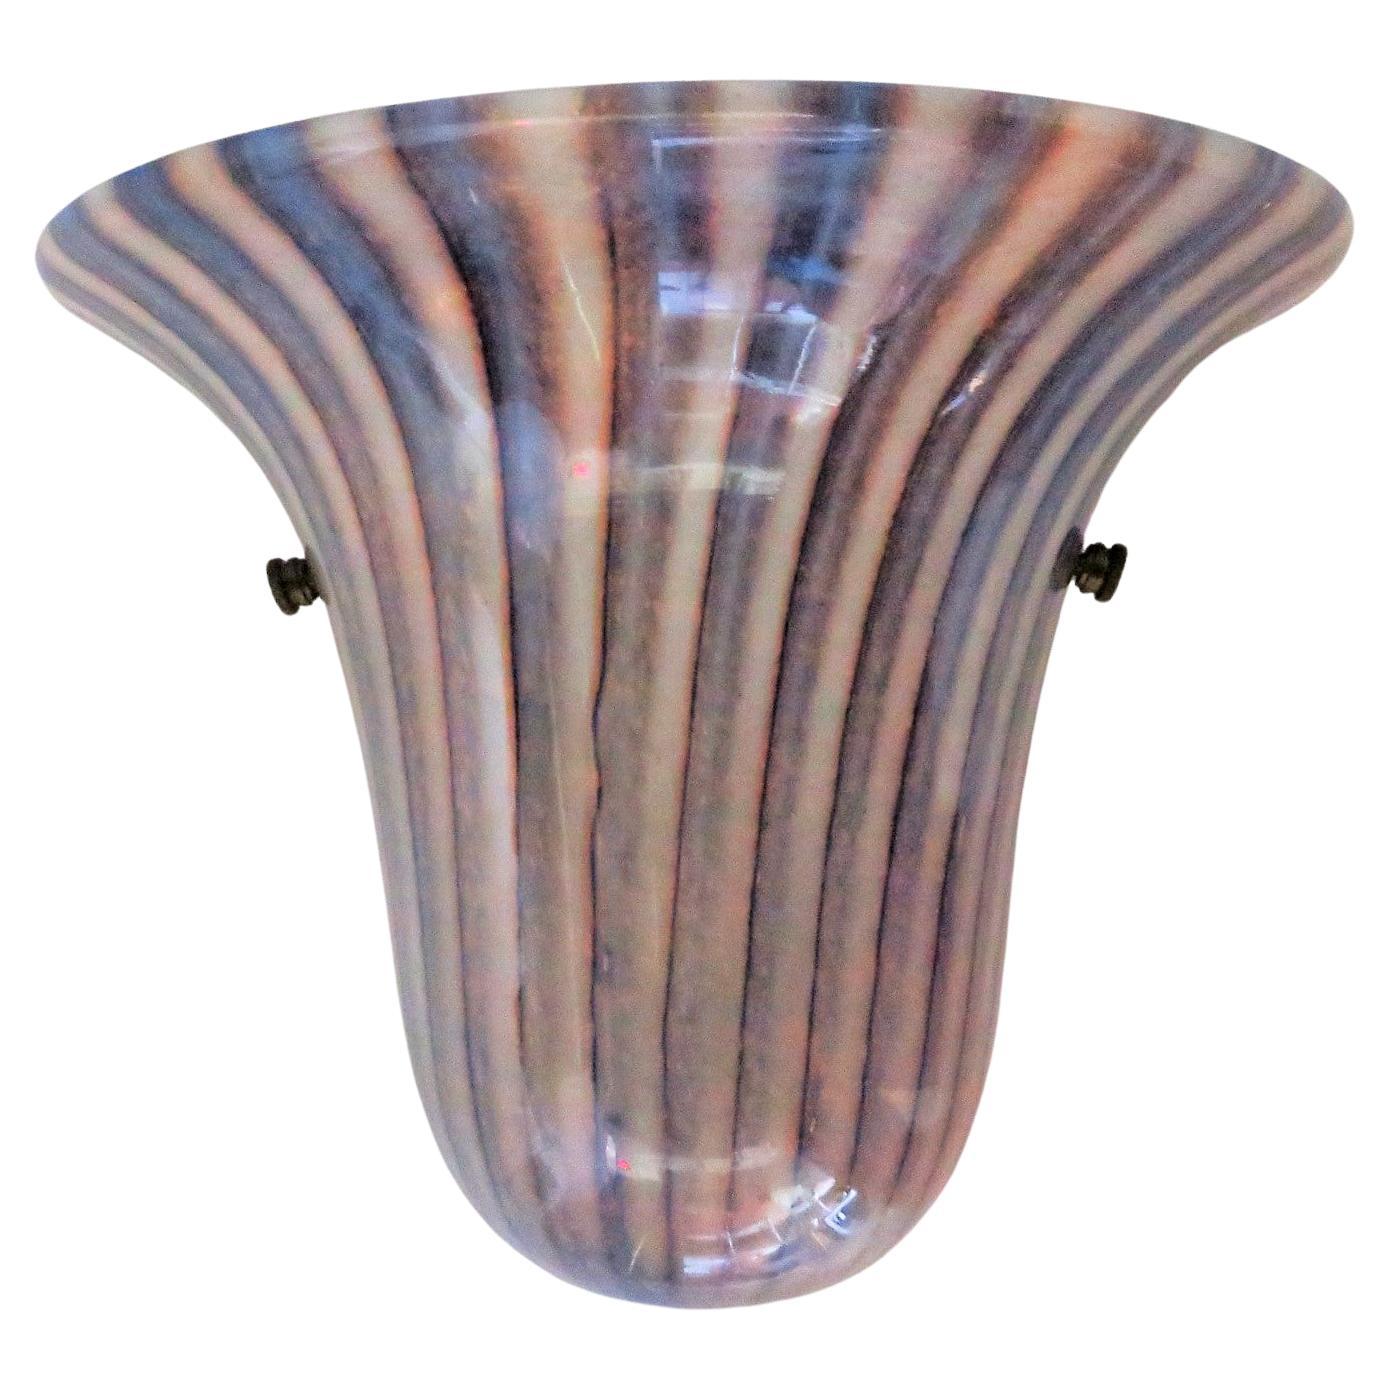 The subdued colors of this single Murano Glass Sconce would be very elegant in any home decor.  With an upside down half bell shape form and an blown glass spray of pinks and gray-blue color stripes terminating in an opening at the bottom, its